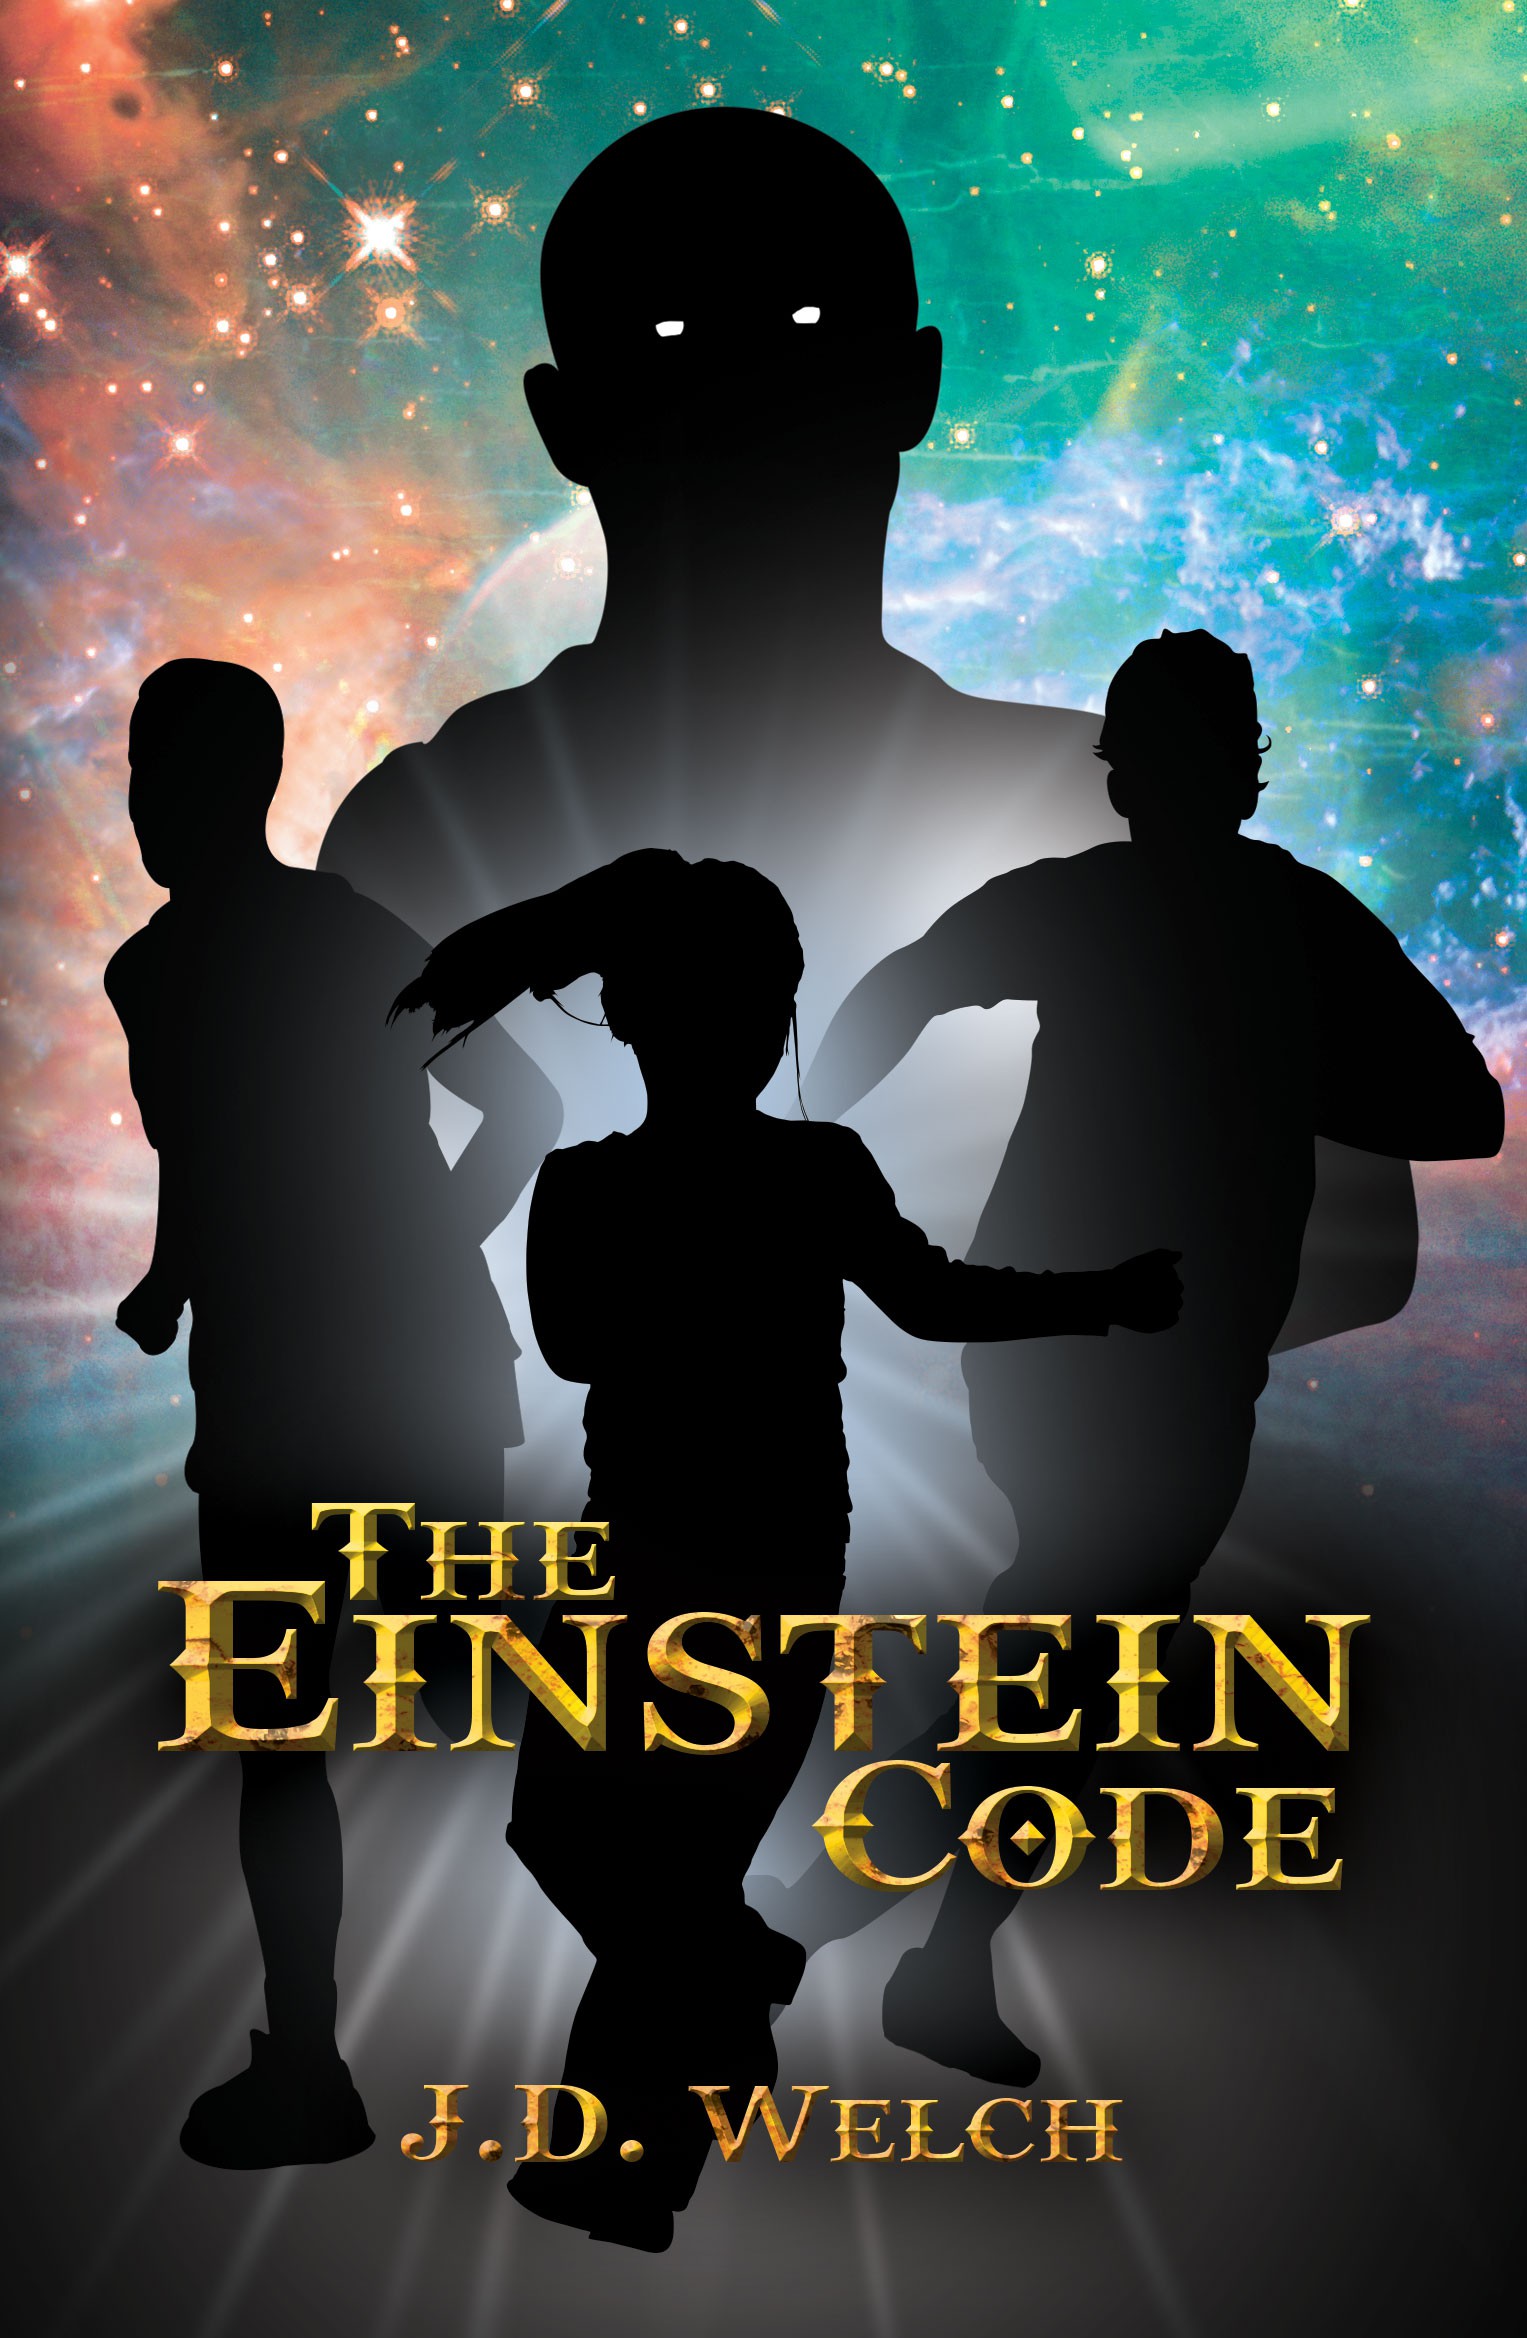 Can you crack the code to win a copy of the Einstein code?